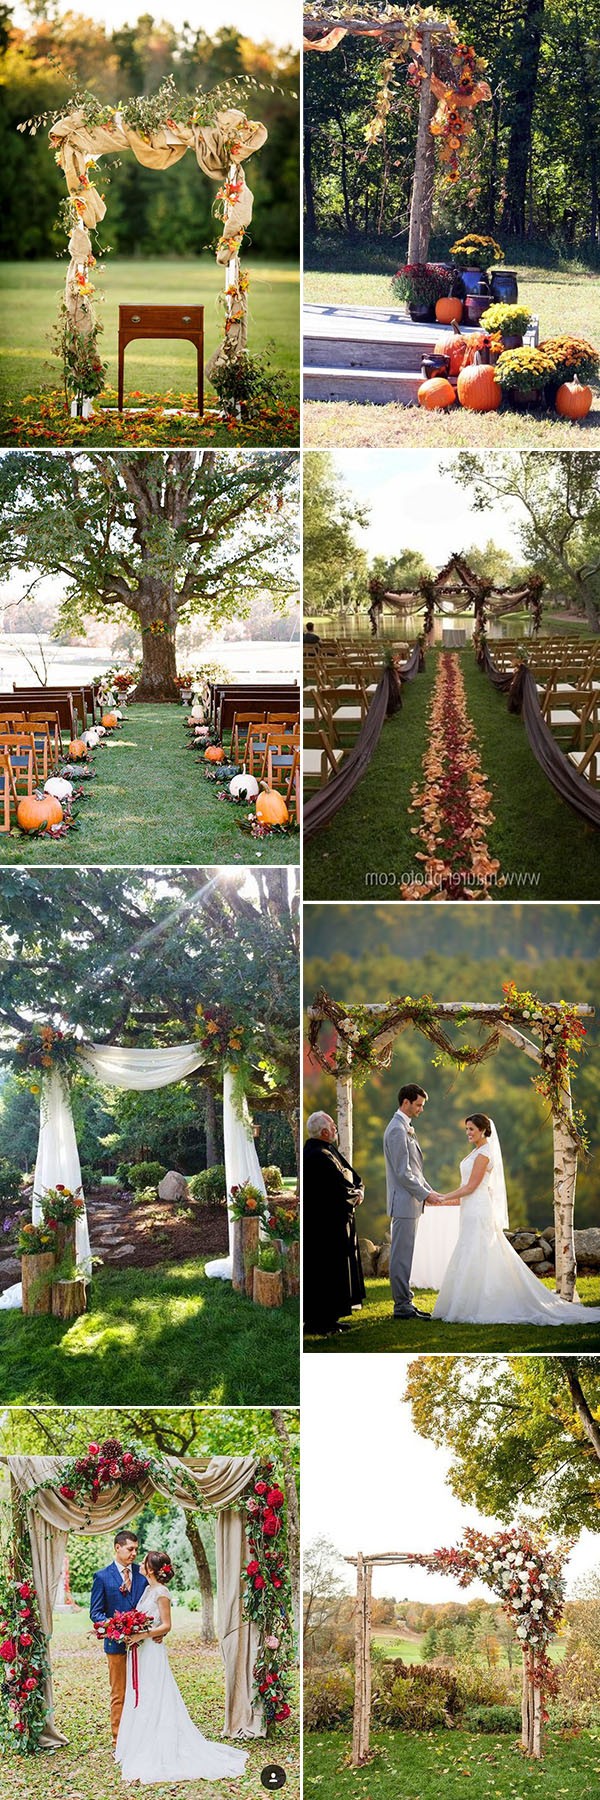 fall wedding ceremony and arches ideas